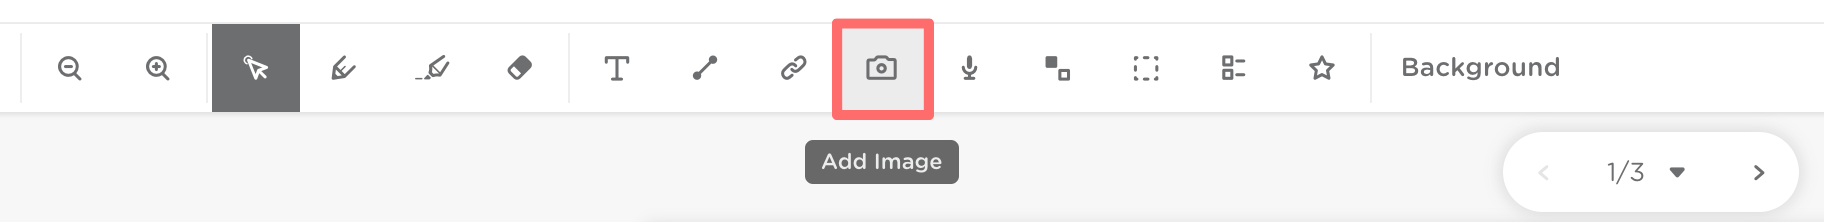 The tool bar on a slide. The add image icon is outlined in red.